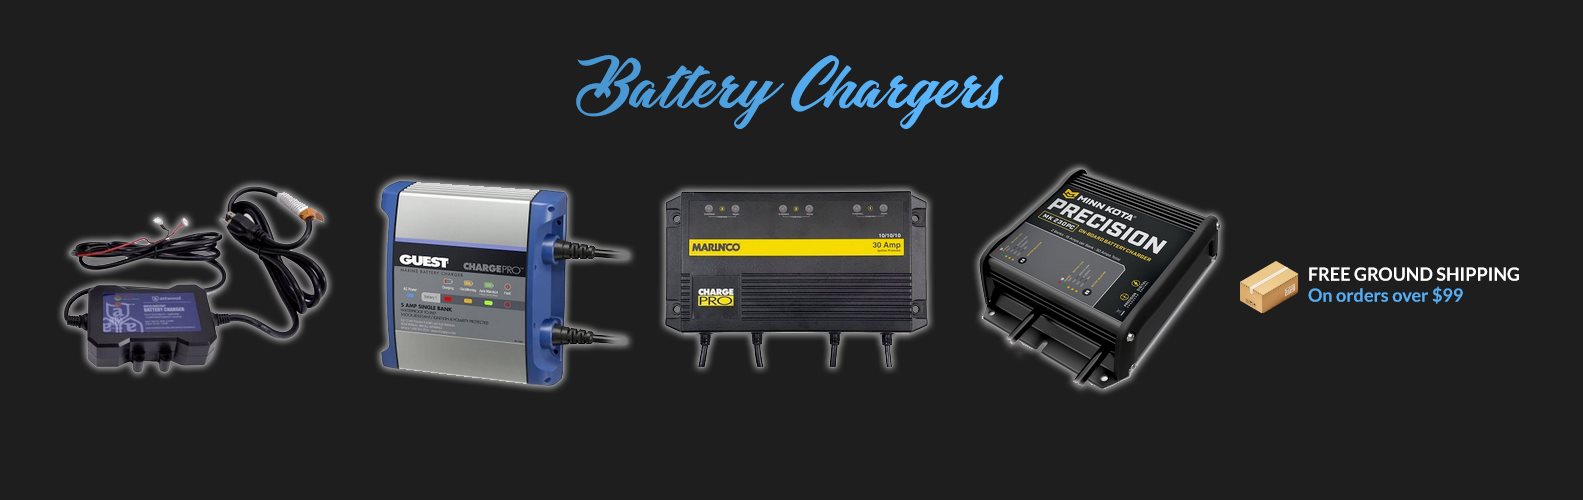 Battery-Chargers-008